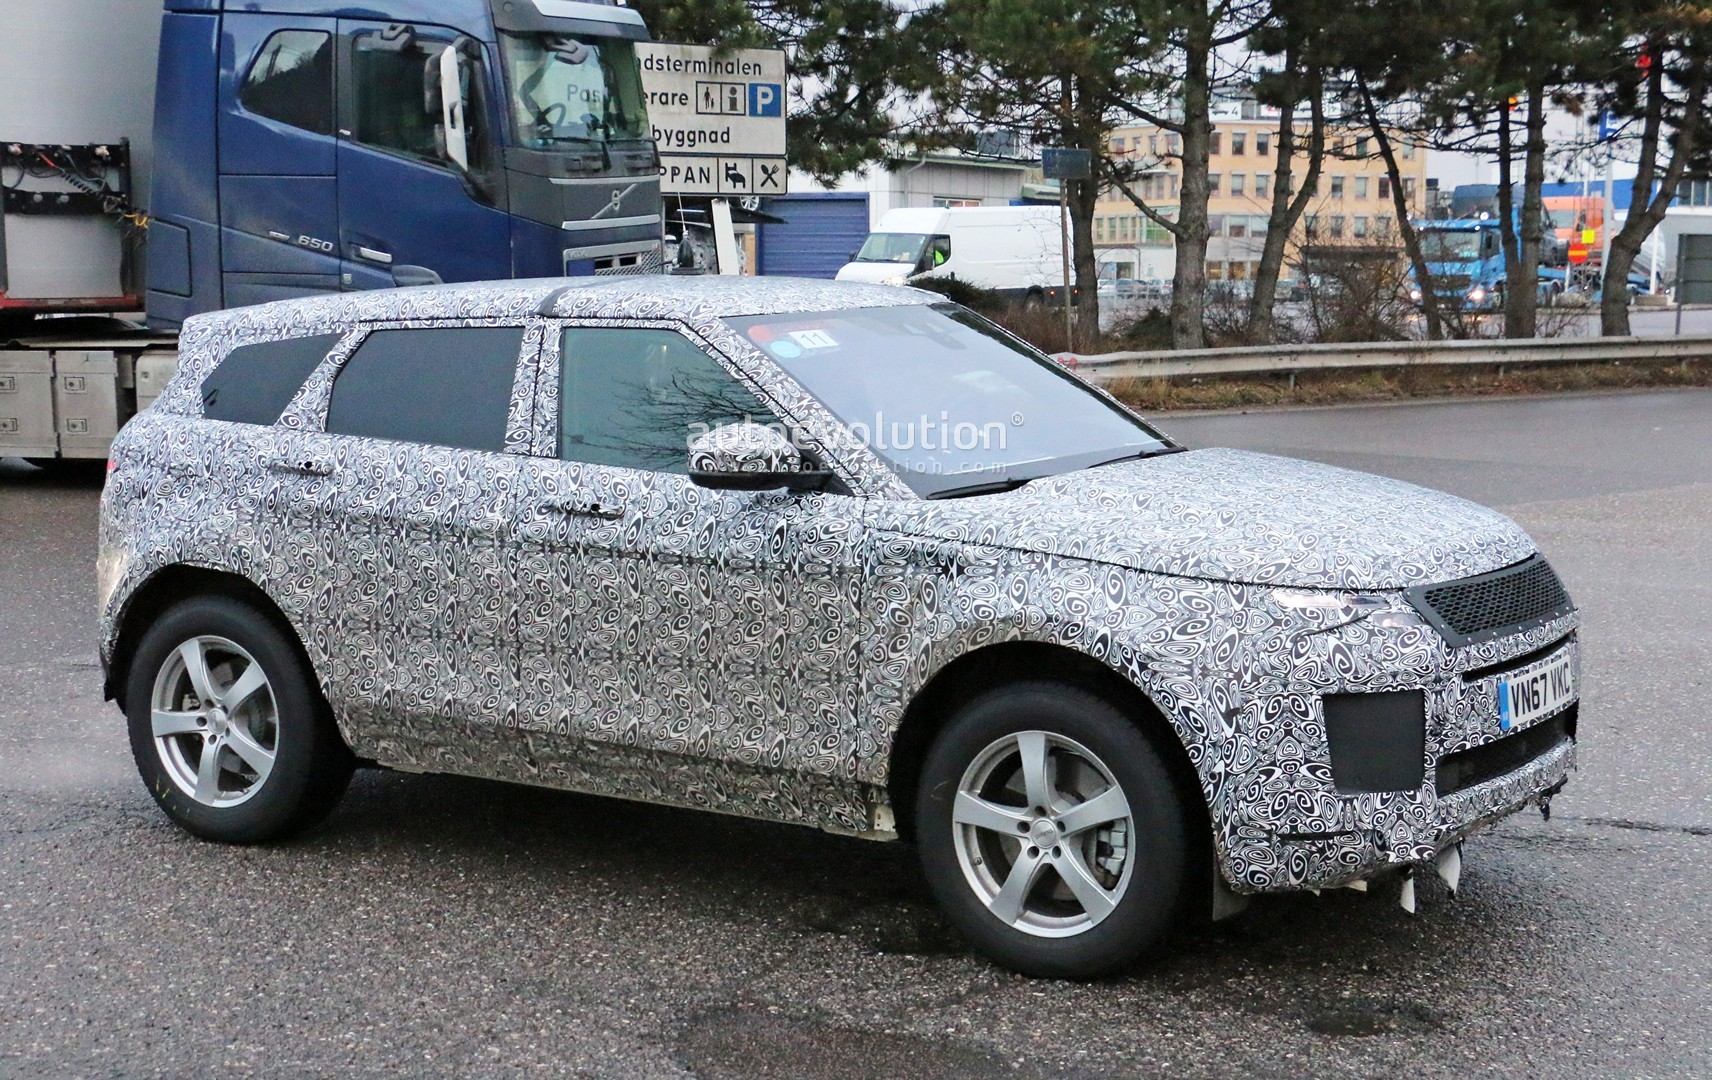 2018 - [Land Rover] Range Rover Evoque II - Page 2 2019-range-rover-evoque-has-scraped-its-camo-most-likely-due-to-off-roading_2